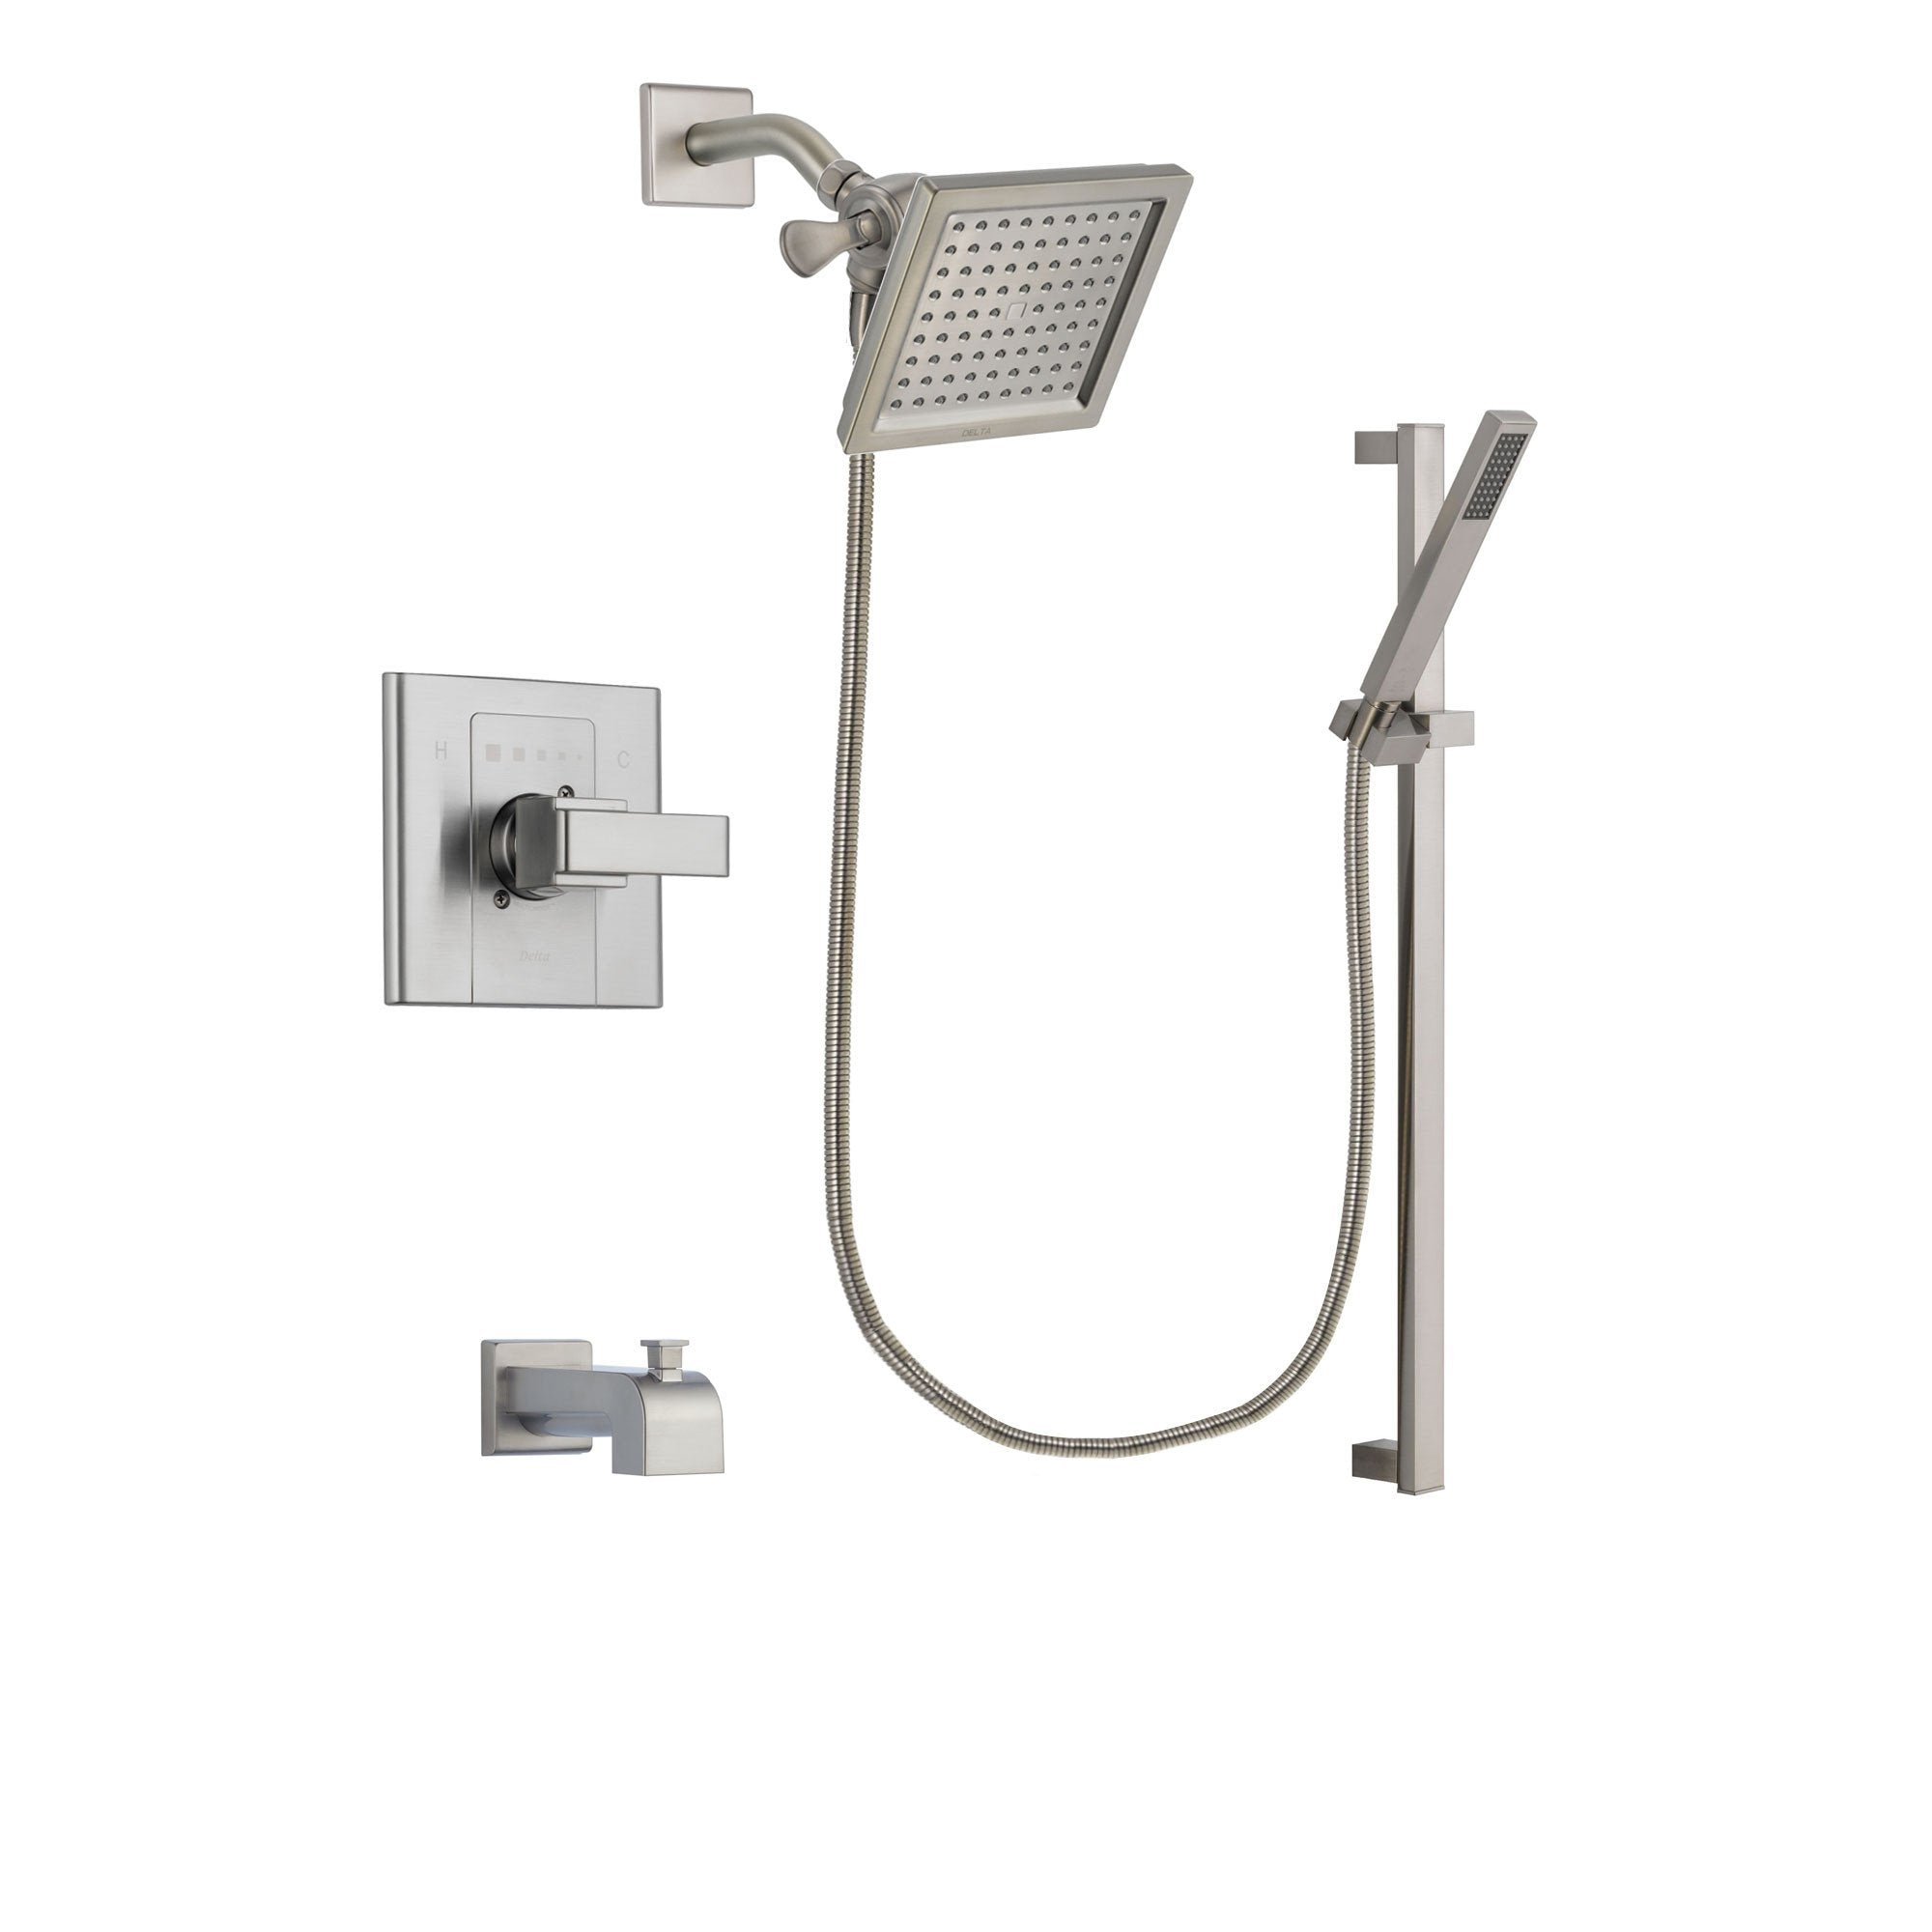 Delta Arzo Stainless Steel Finish Tub and Shower Faucet System Package with 6.5-inch Square Rain Showerhead and Modern Personal Hand Shower with Slide Bar Includes Rough-in Valve and Tub Spout DSP2355V